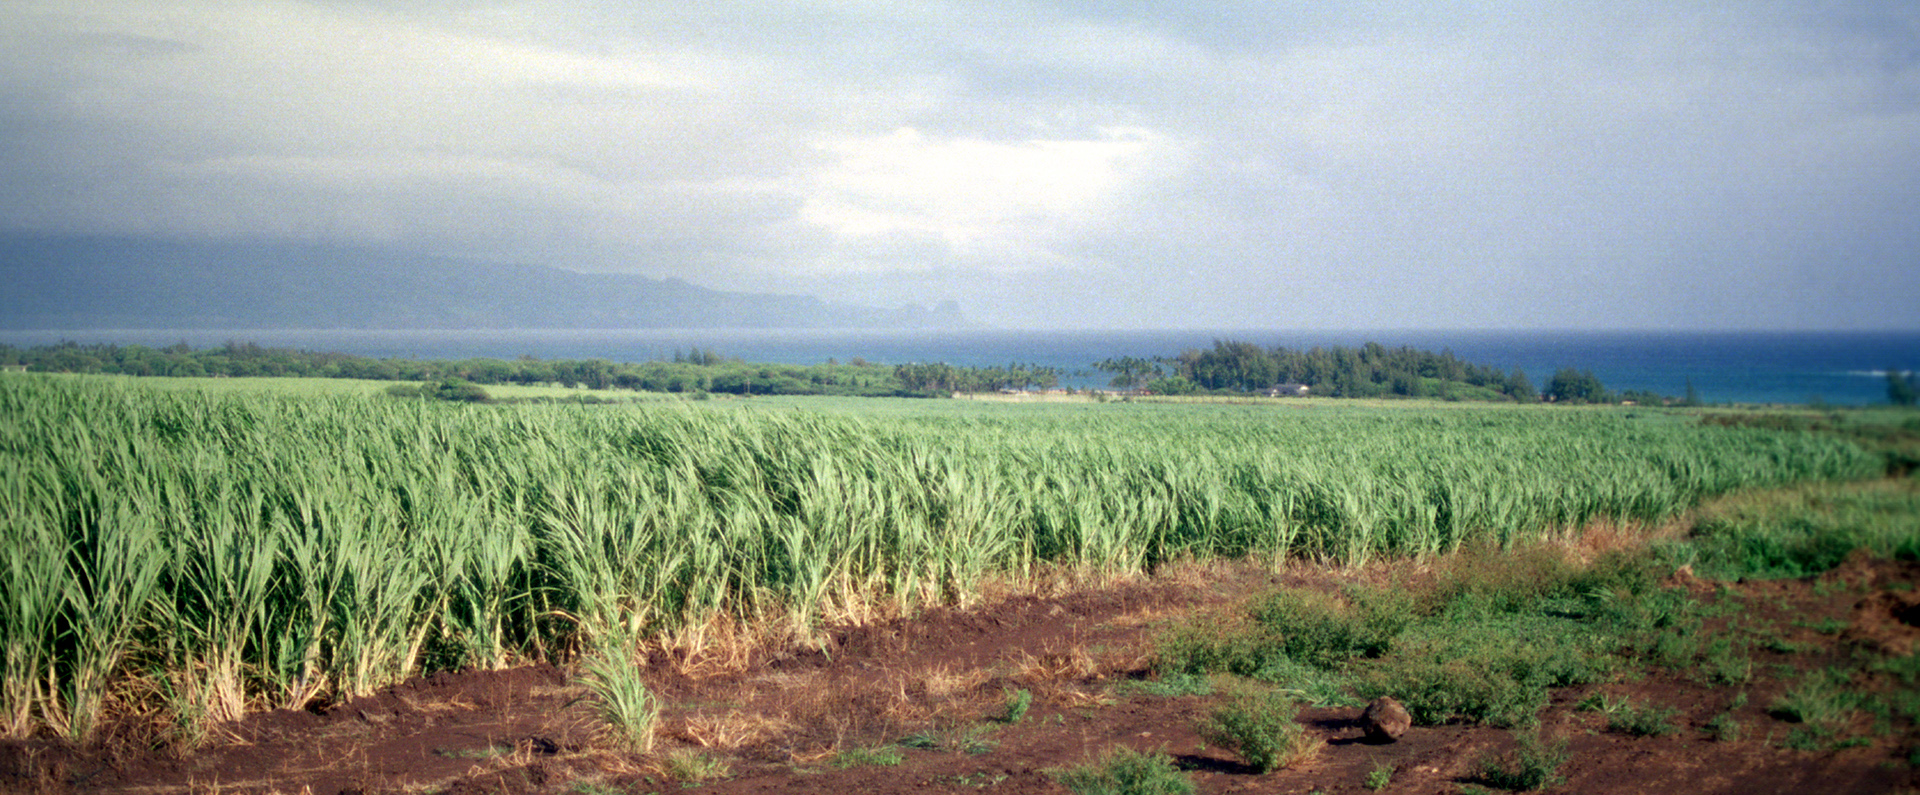 A field of sugarcane